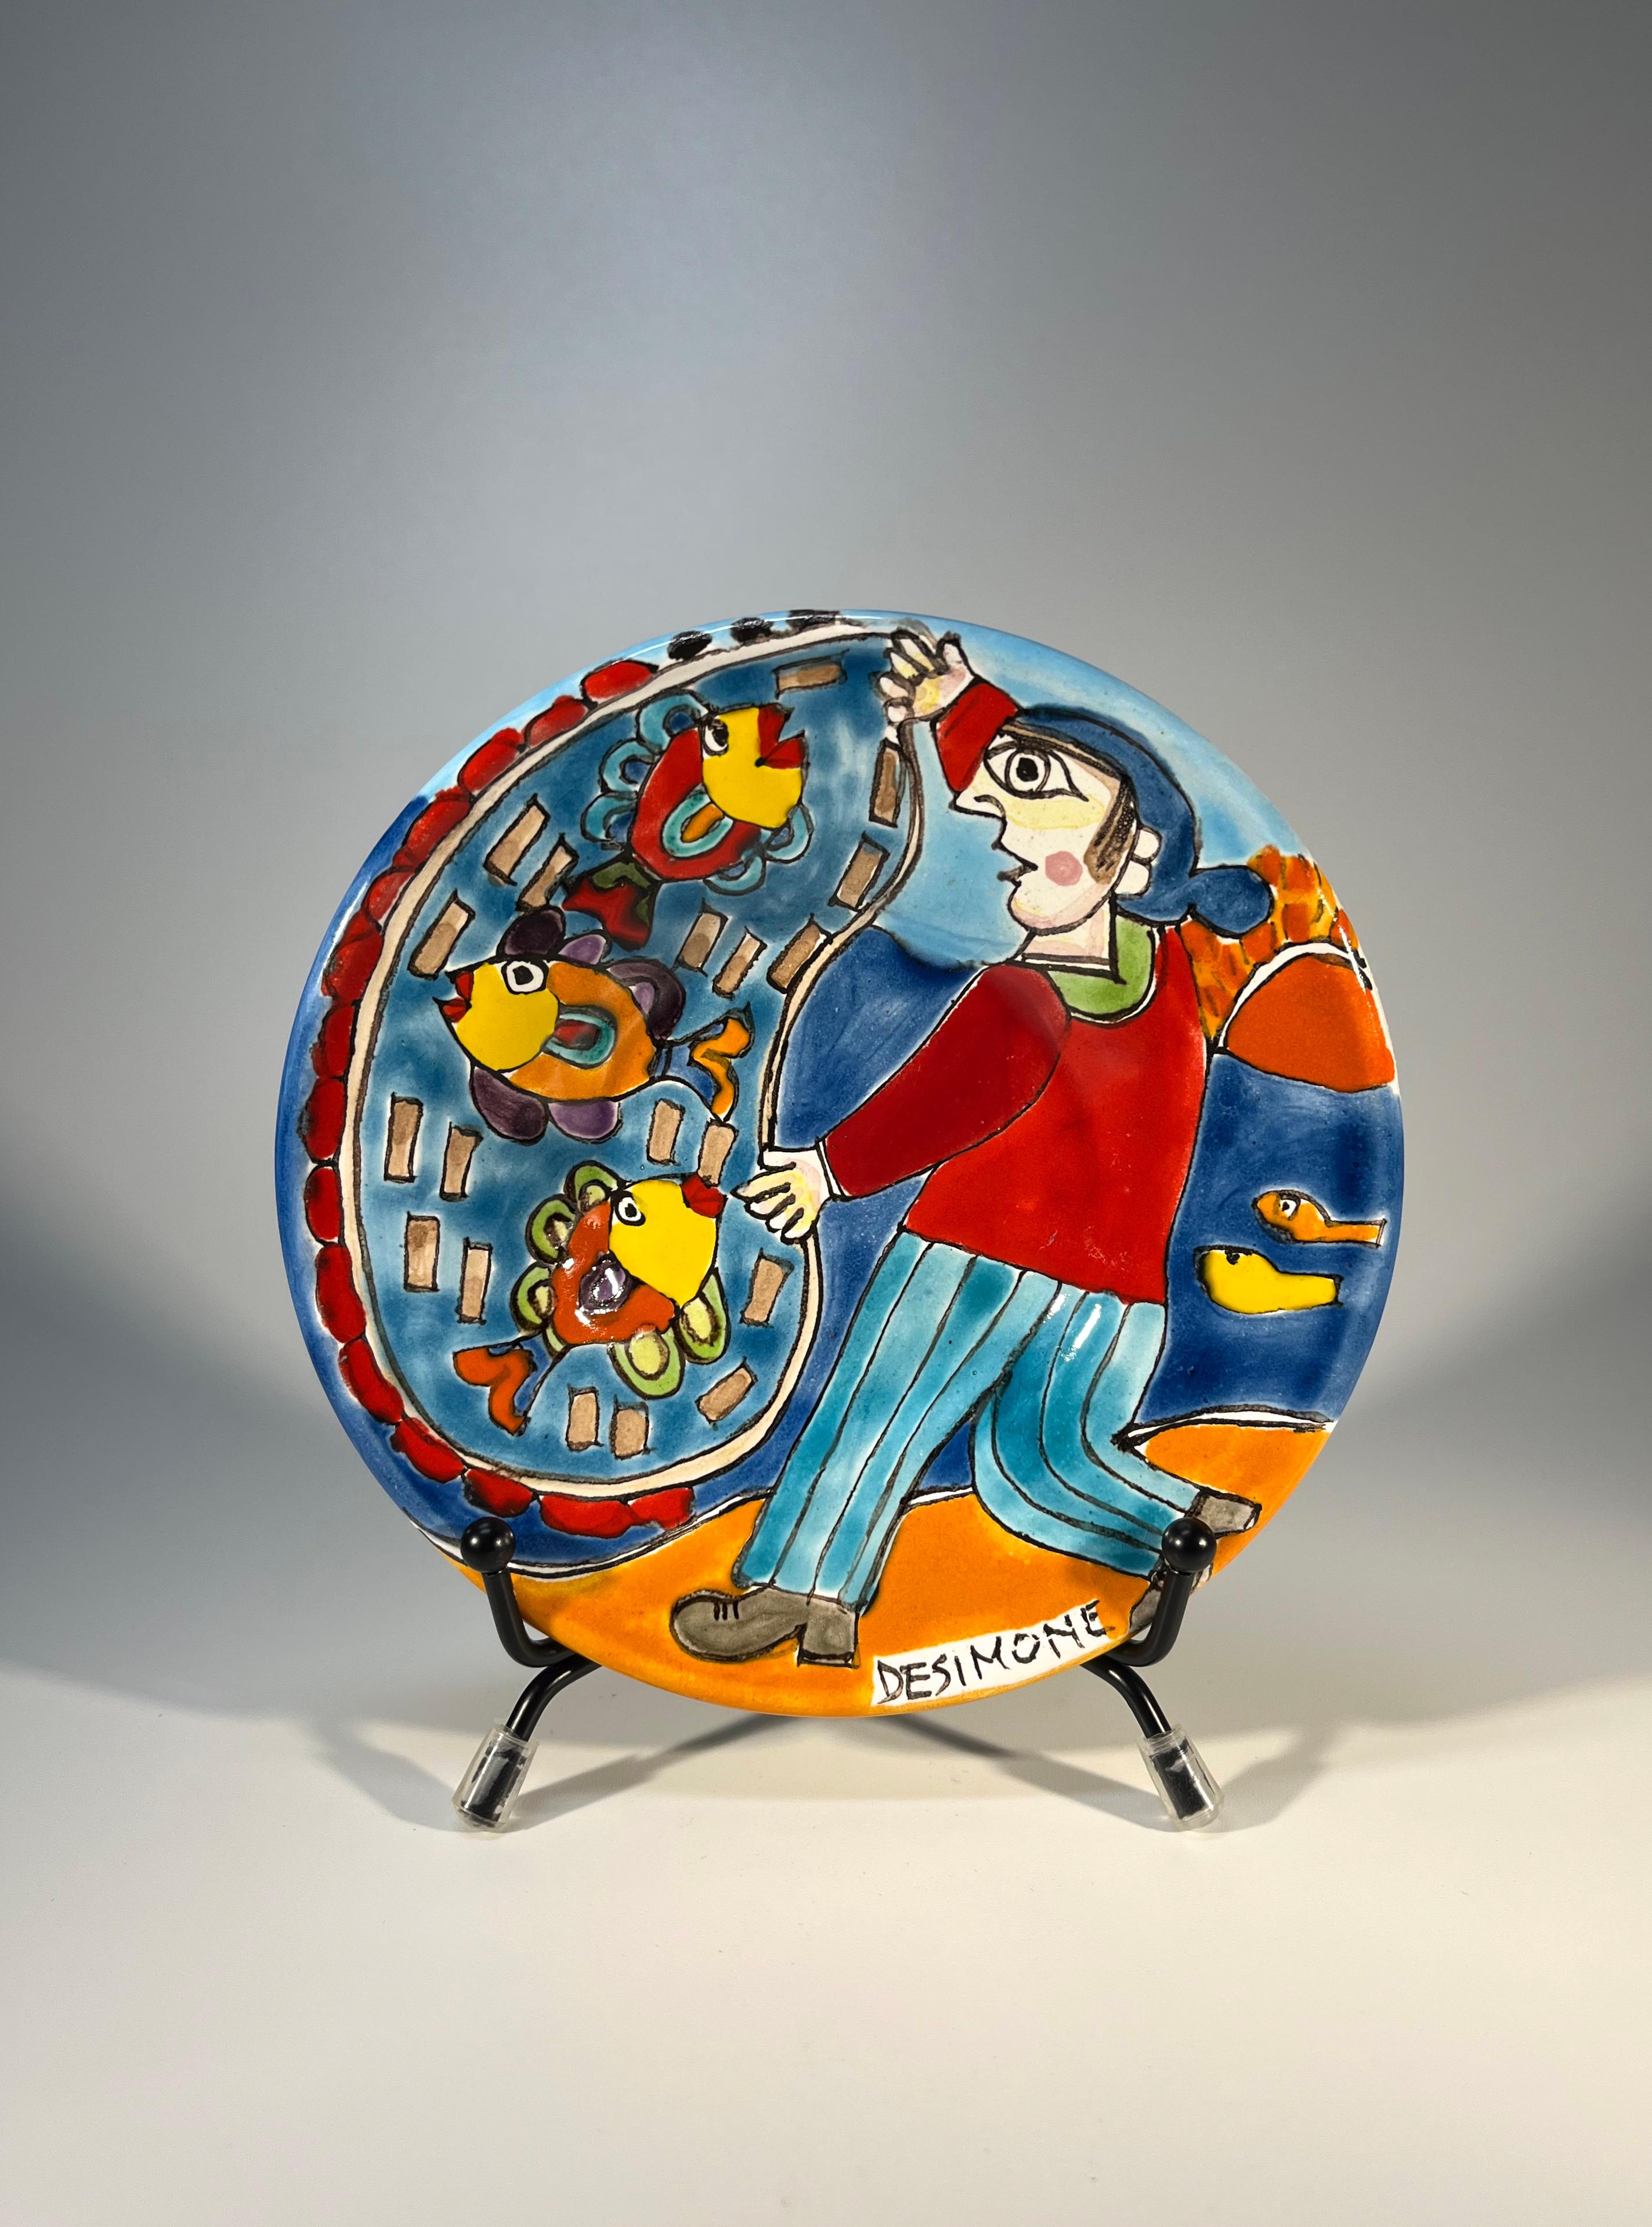 Original and signed by Giovanni DeSimone, this hand-painted little plate is full of colour and life depicting a busy fisherman
Small in size, huge on personality - Giovanni at his best
The condition of this piece is exceptional 
Signed to front by